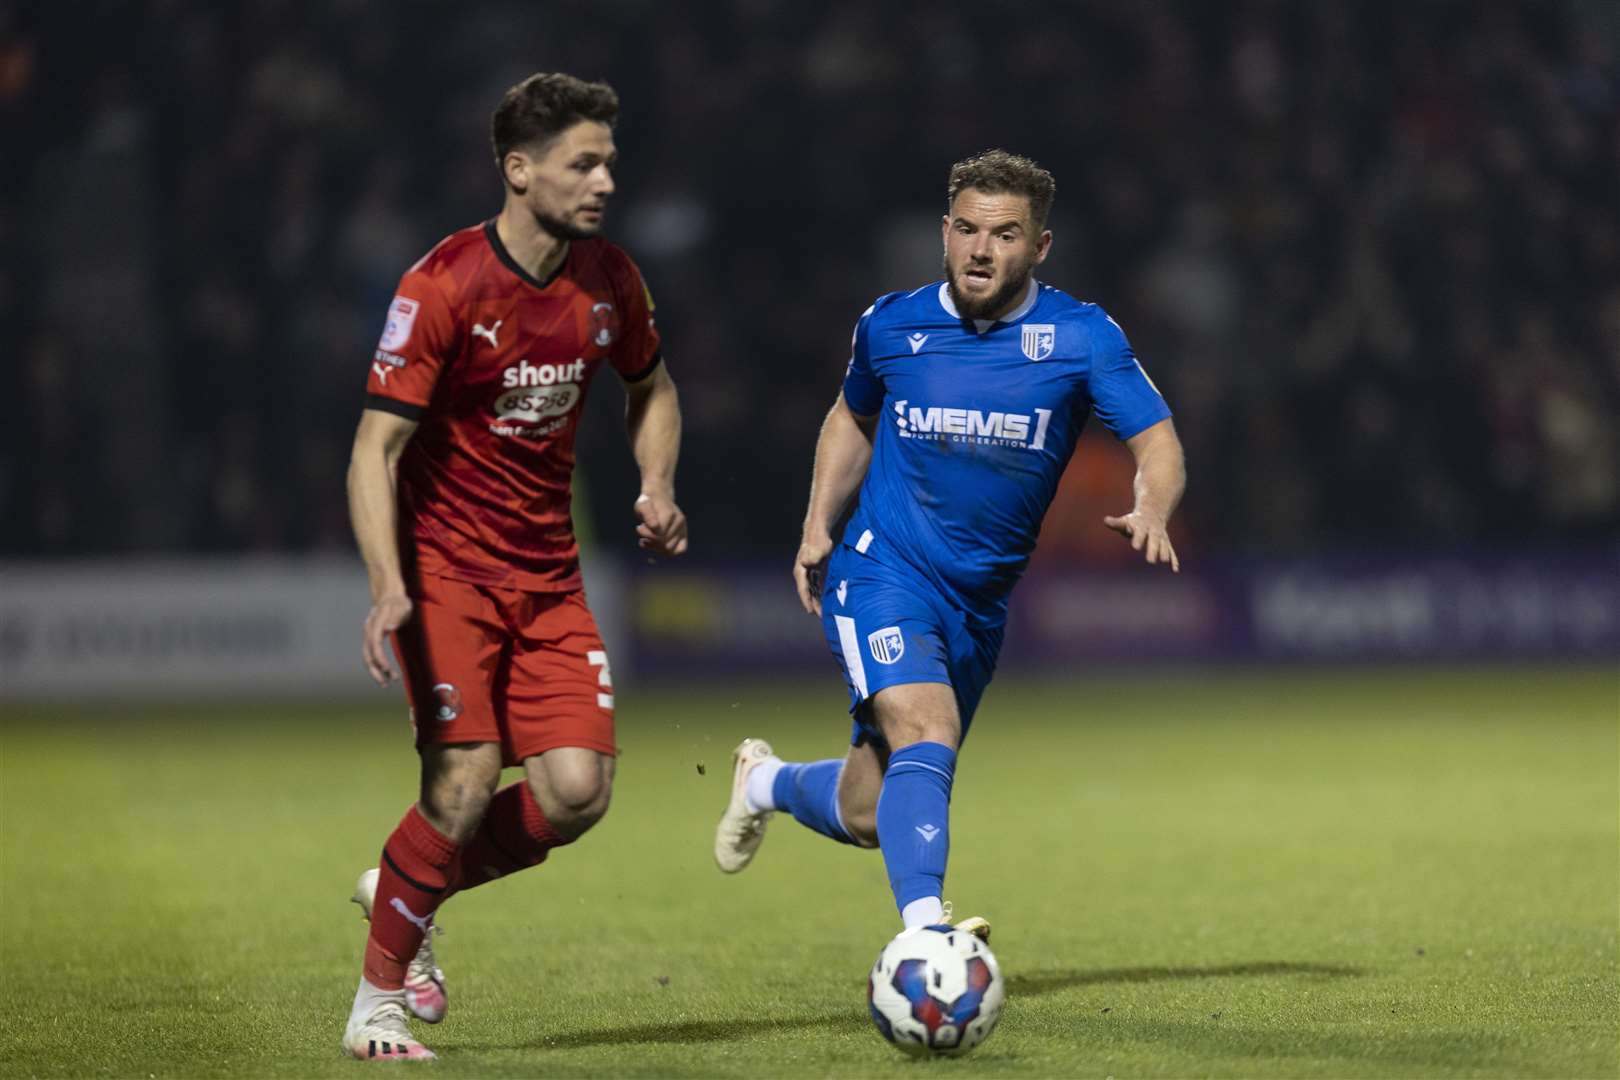 Alex MacDonald chasing down the ball for Gillingham against Leyton Orient